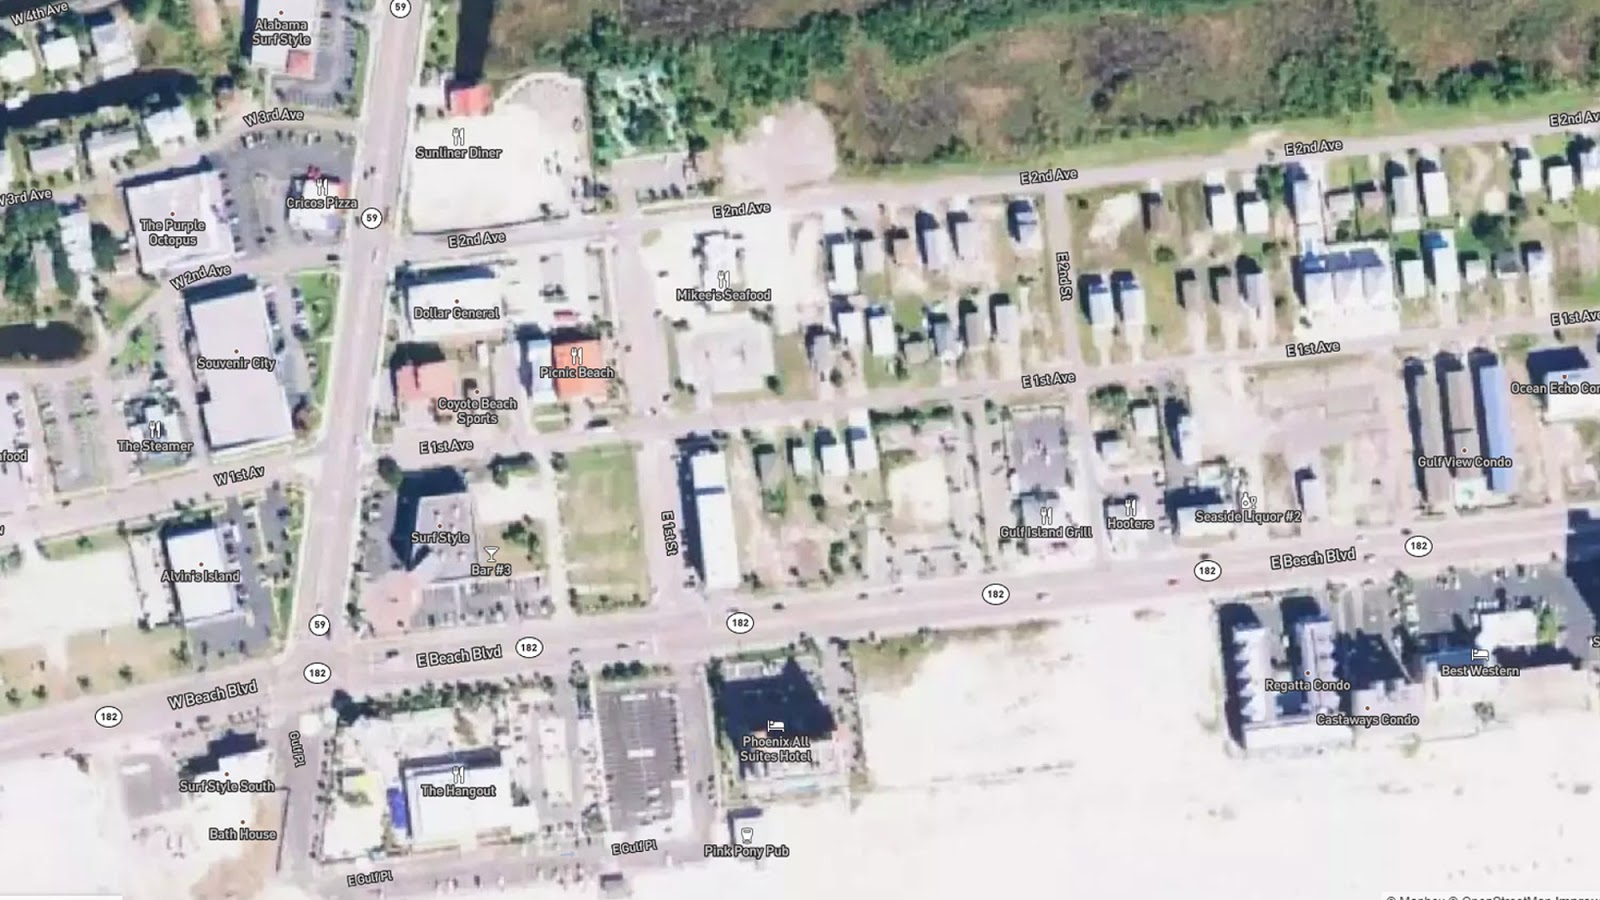 an image showing Area west of Shelby Lake, Gulf Shores, Alabama (near SR-182) before Sally